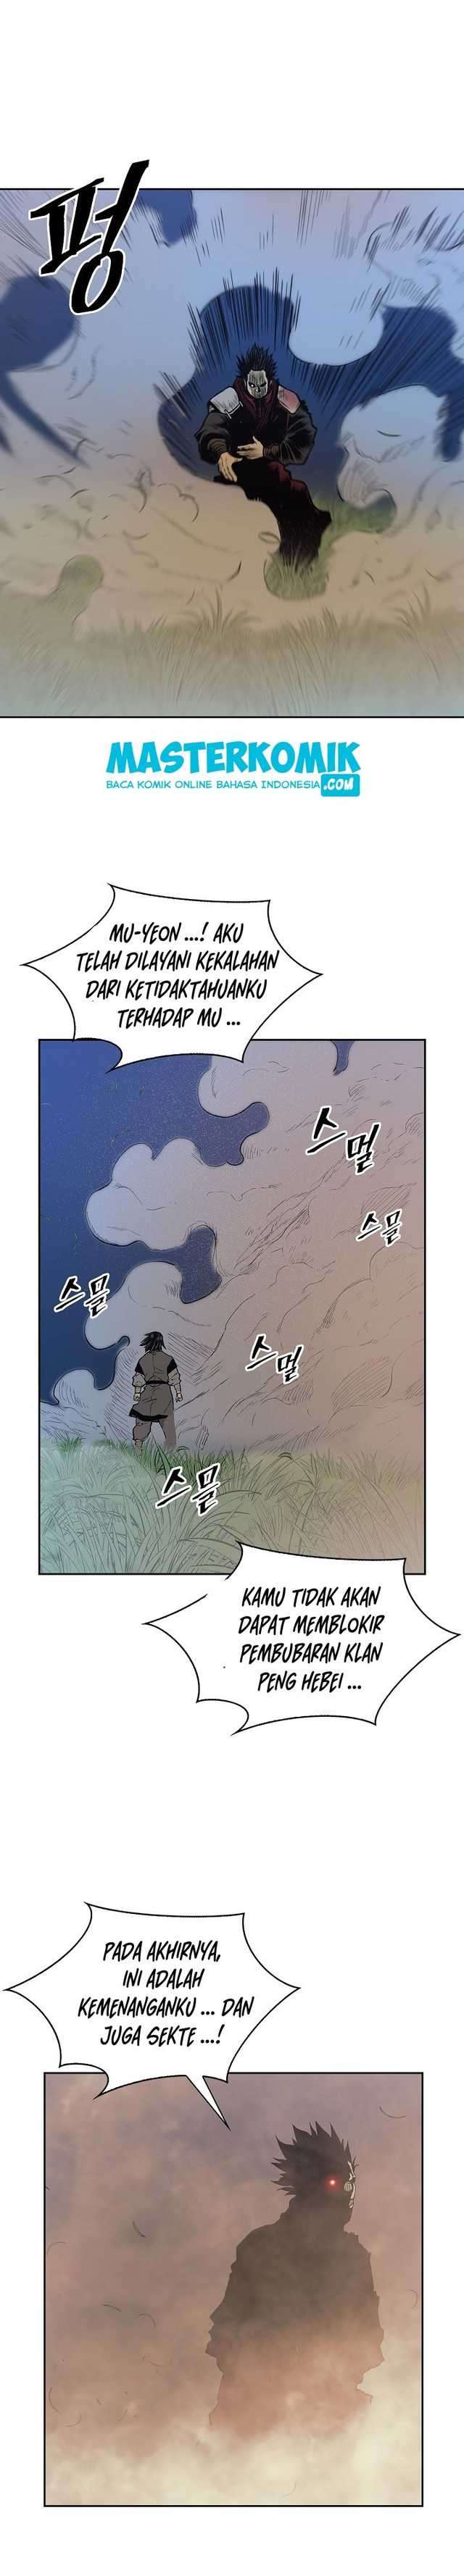 Record of the War God Chapter 85